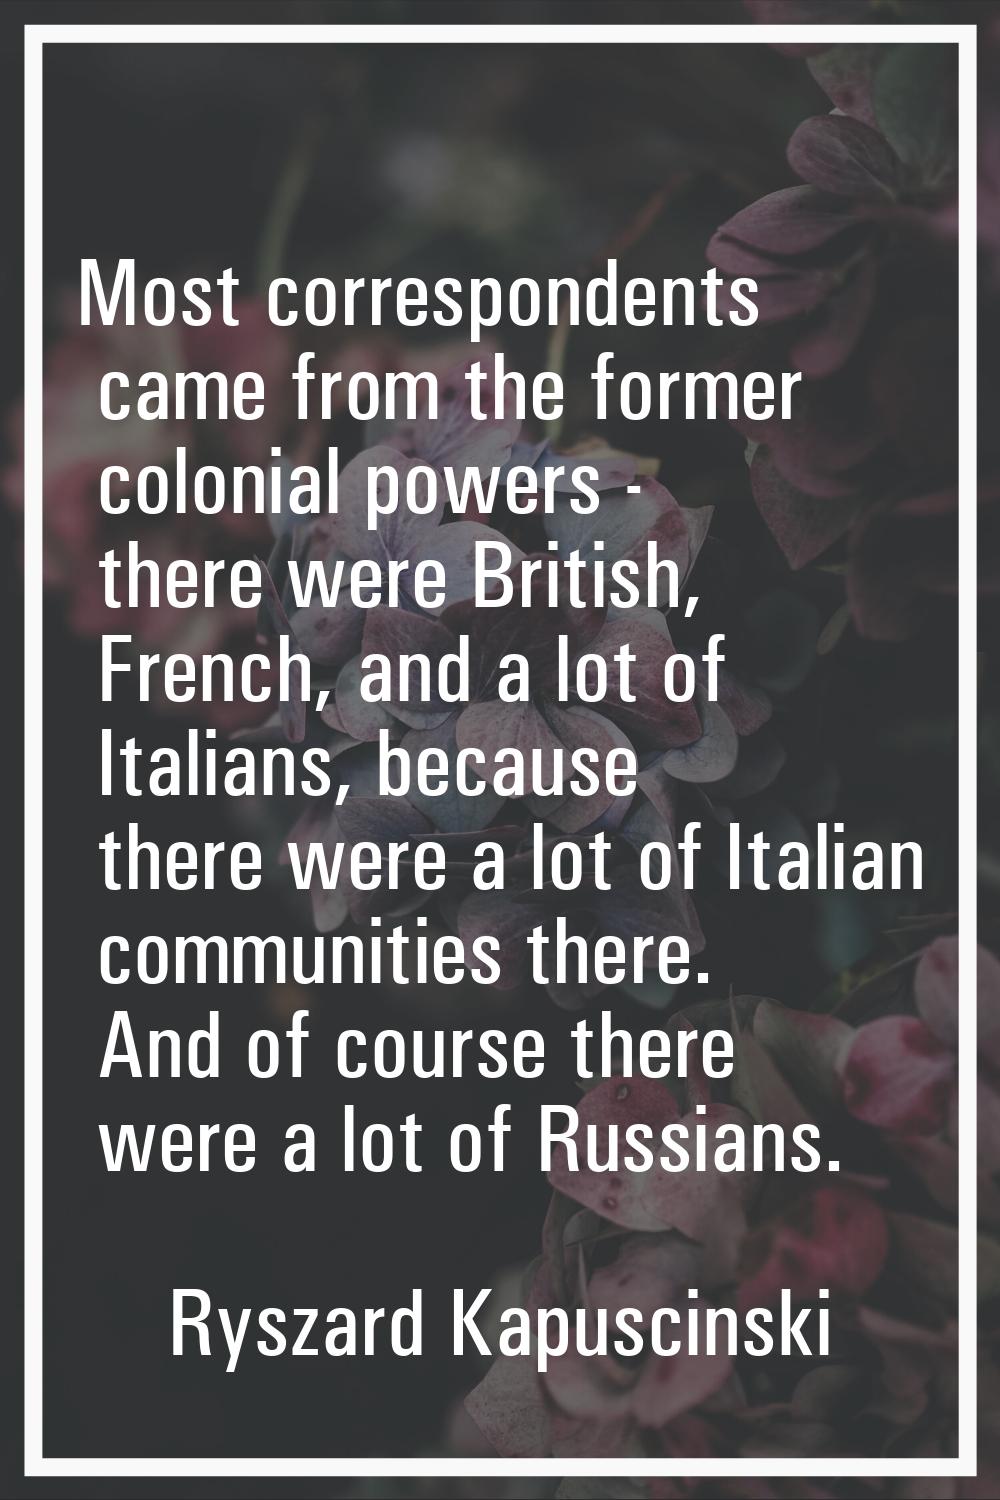 Most correspondents came from the former colonial powers - there were British, French, and a lot of